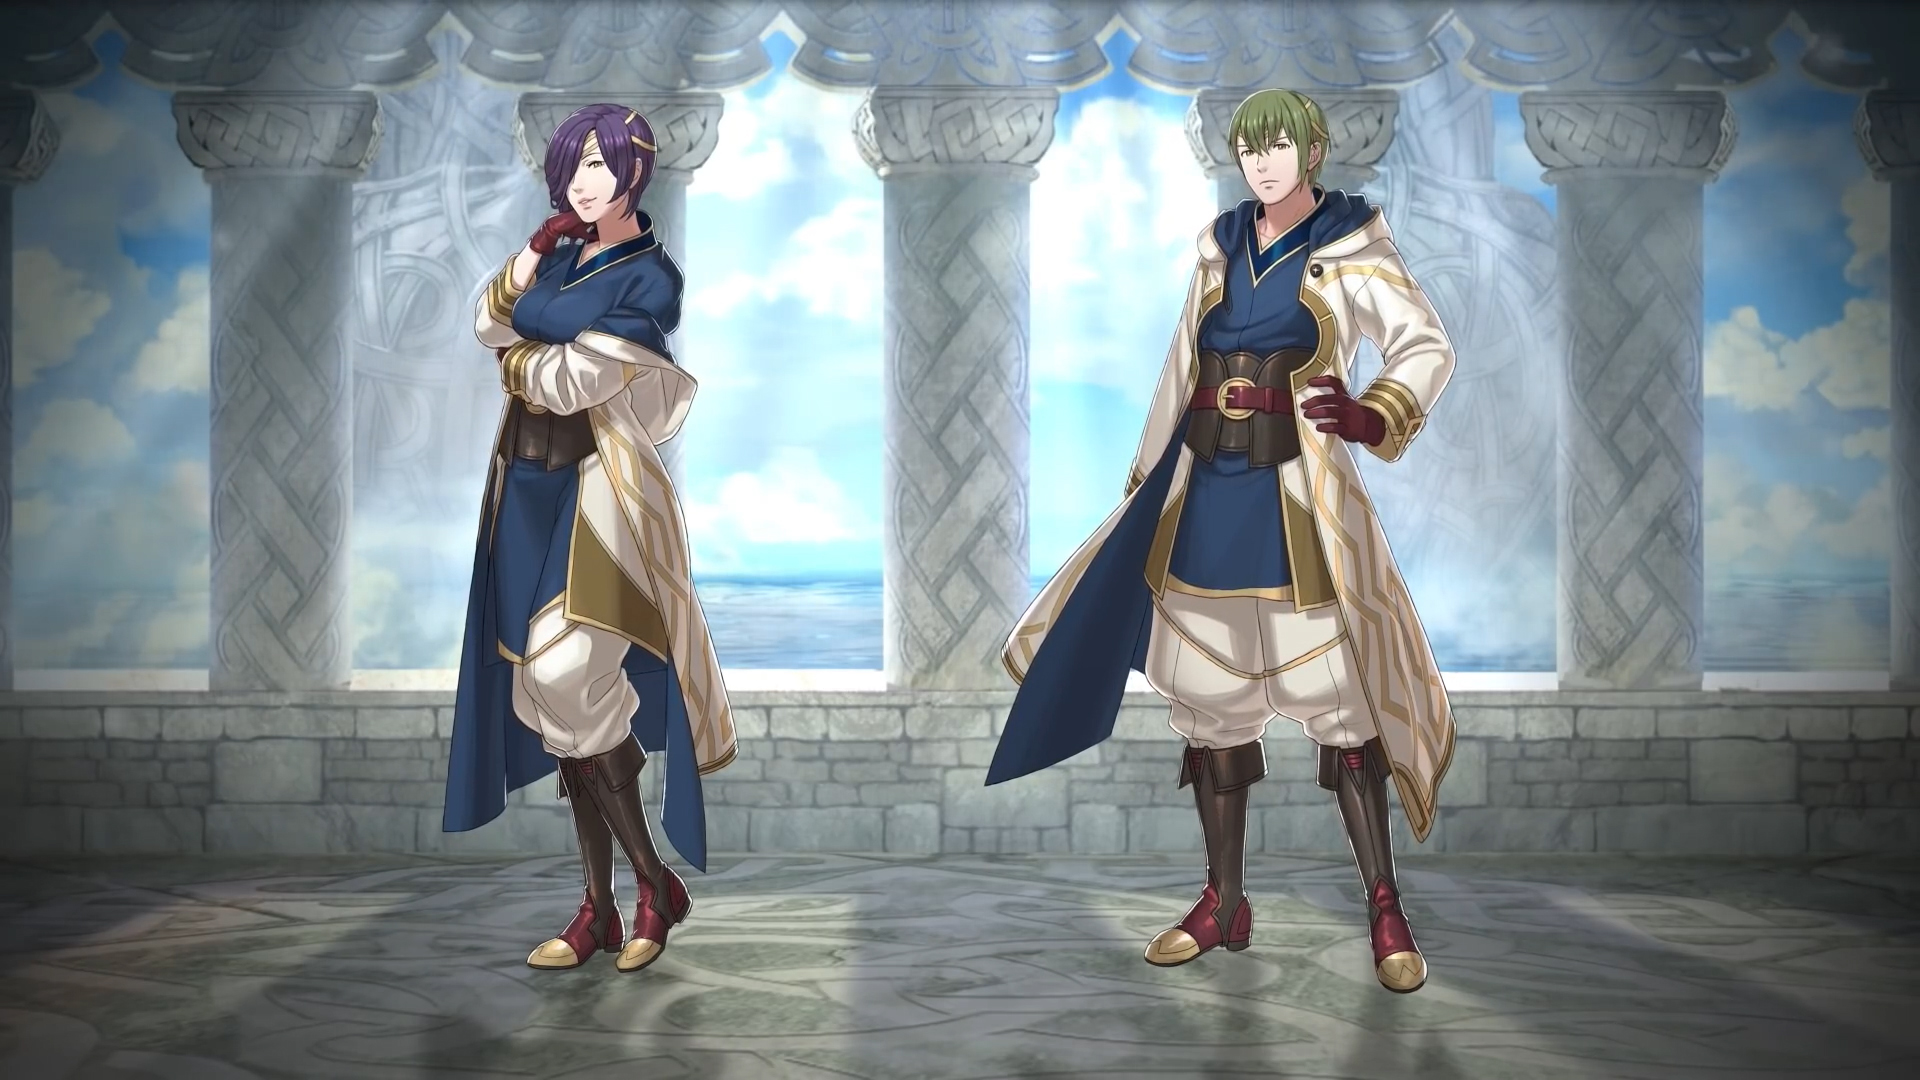 Also discussed in the Feh Channel, the My Summoner will be receiving a coup...